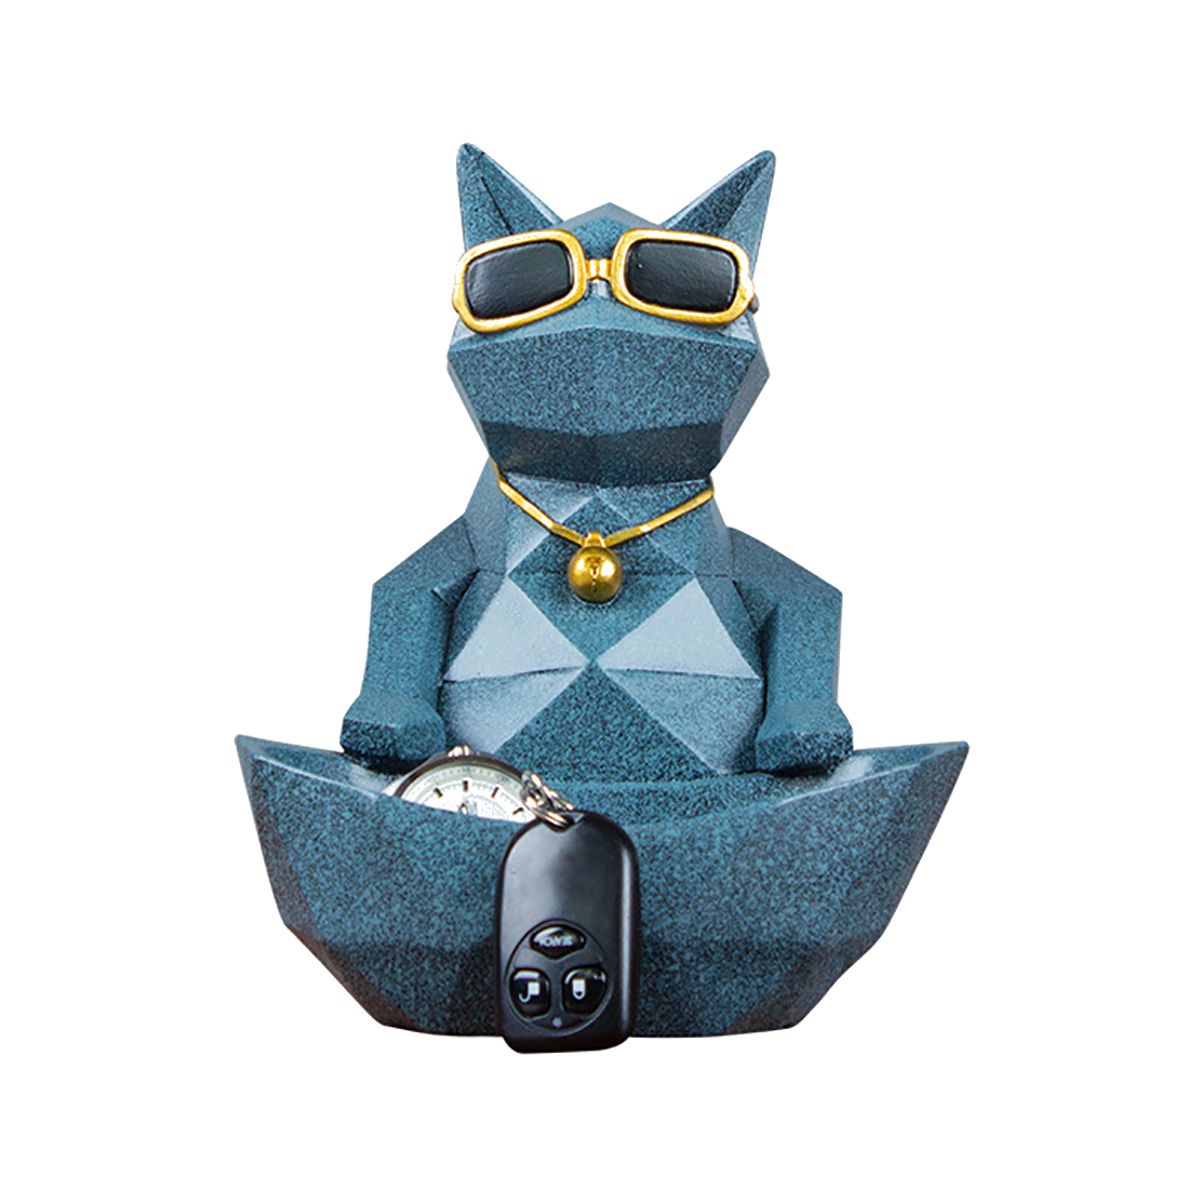 Moden-Lucky-Cat-Figurines-Statue-Storage-Boxes-Craft-Ornament-Holder-Home-Decorations-1629997